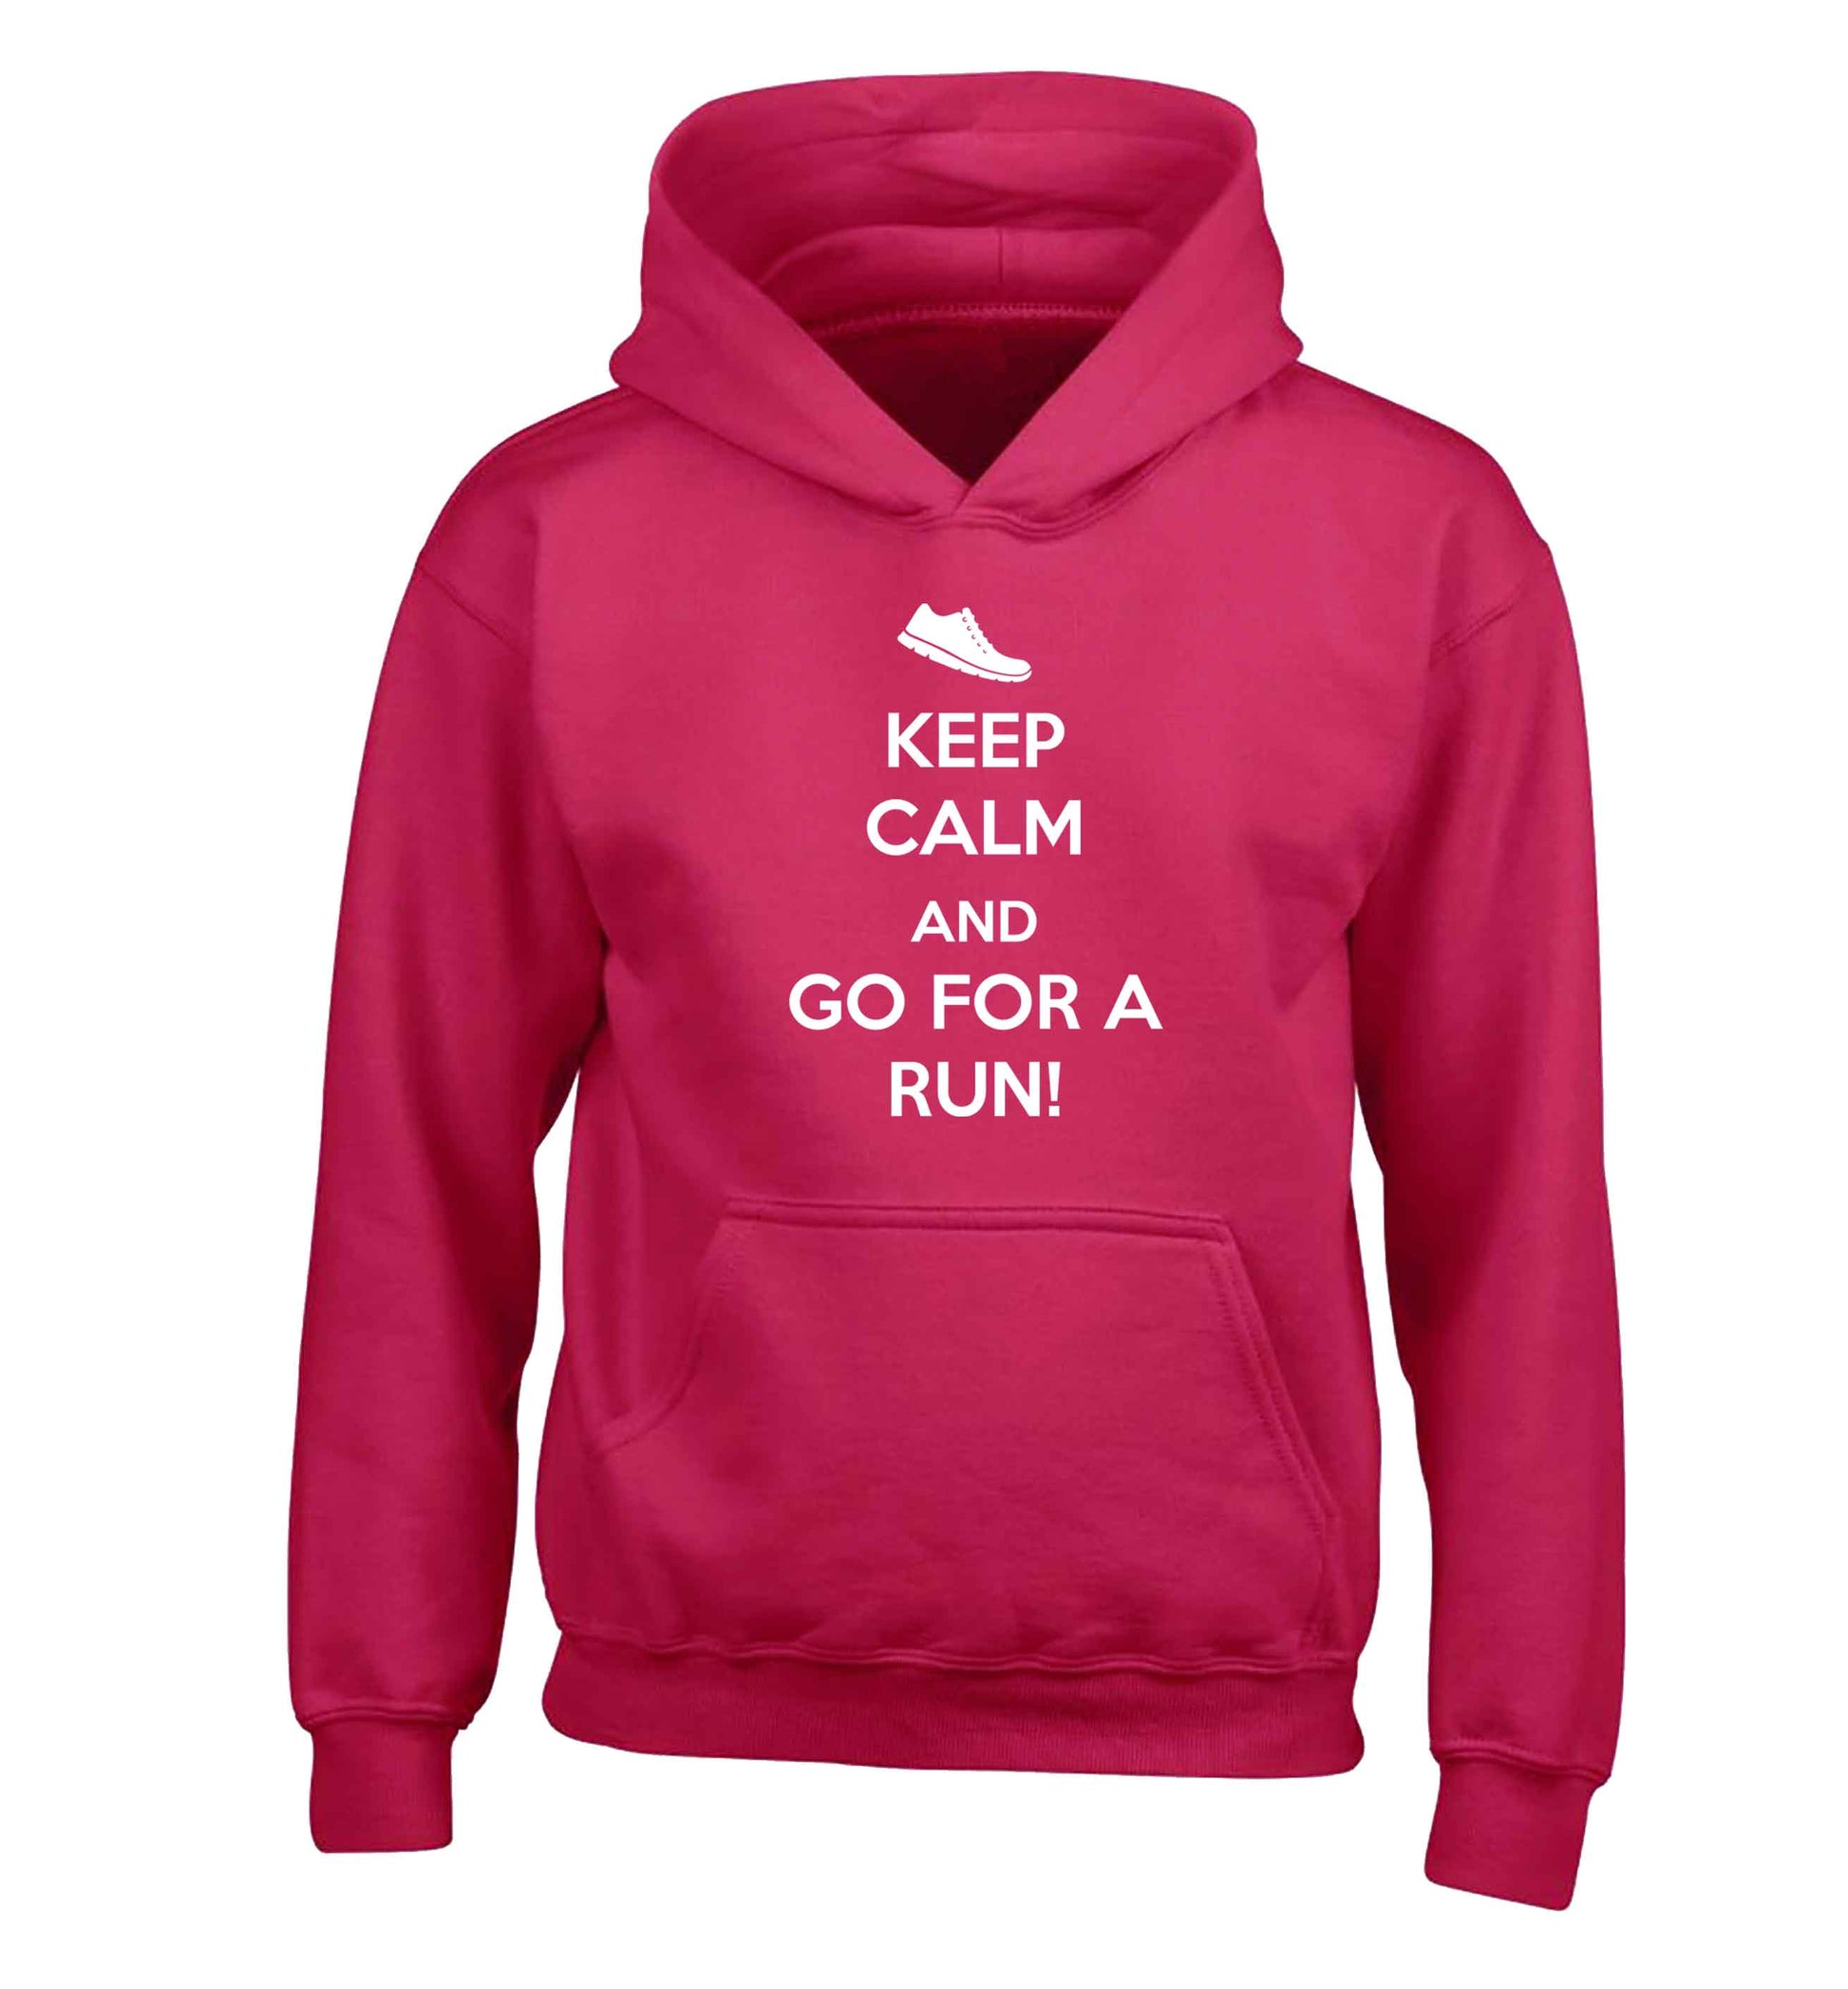 Keep calm and go for a run children's pink hoodie 12-13 Years